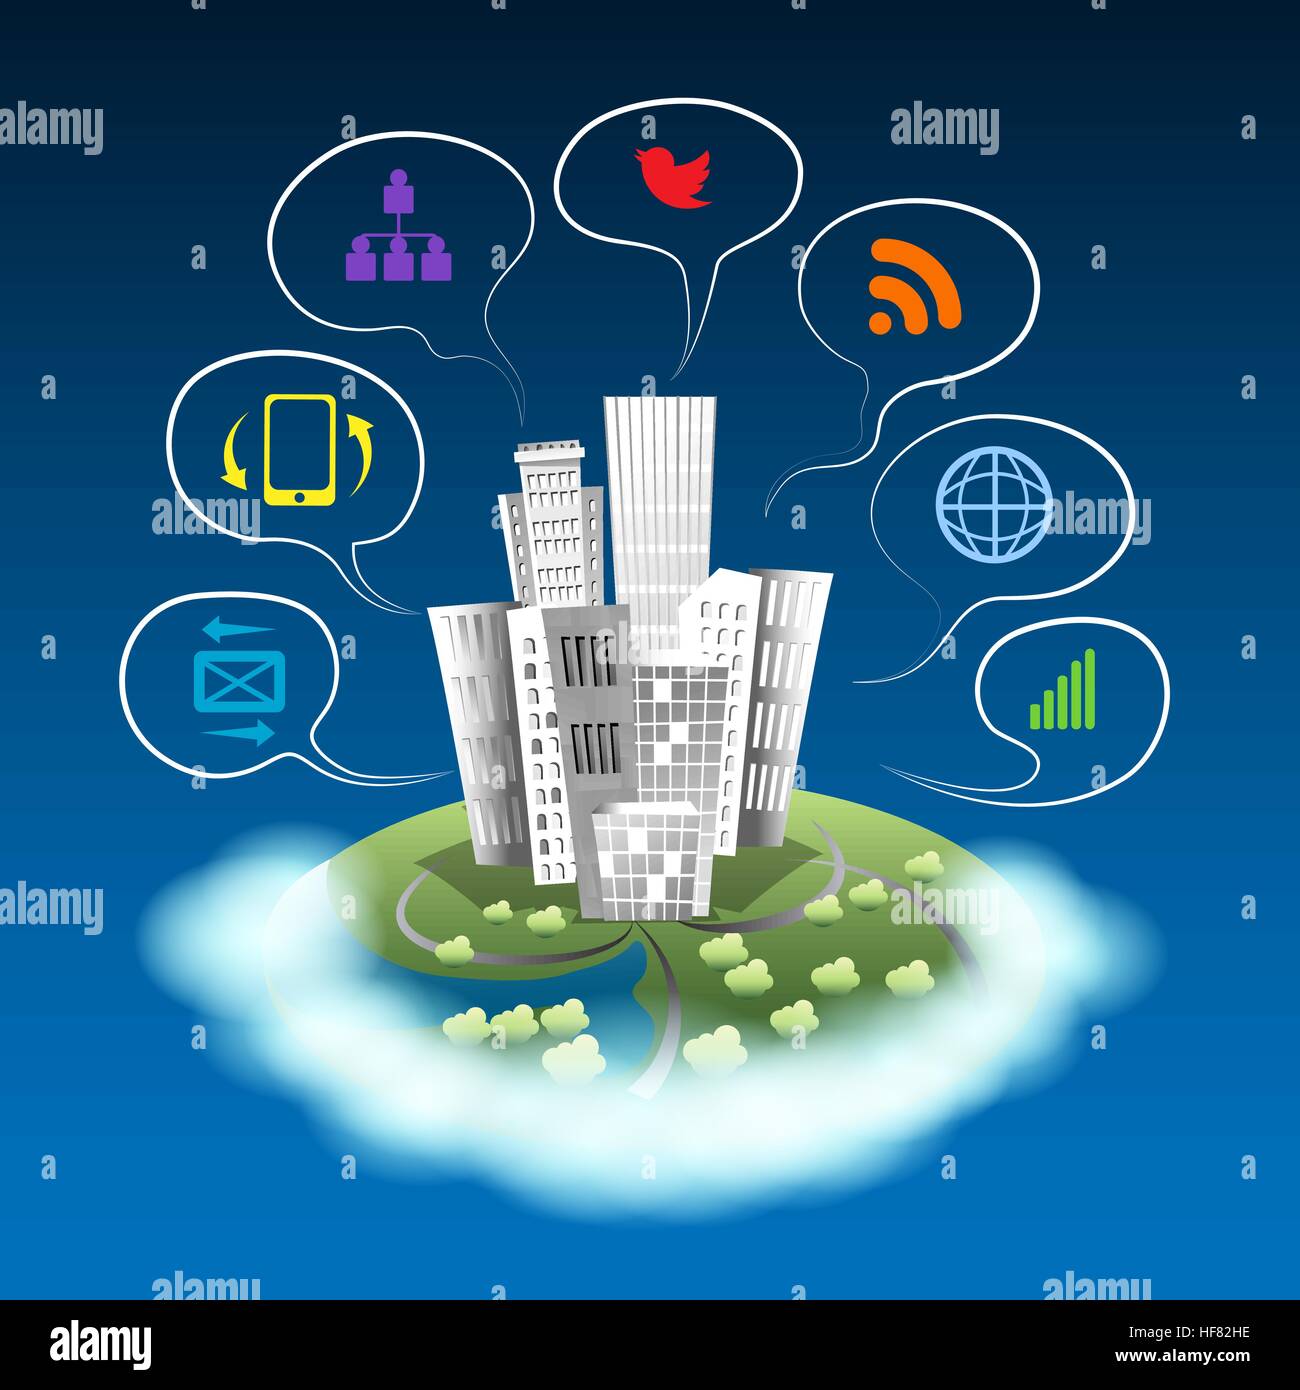 City on a cloud with communication icons. Urban area social networking devices. Stock Vector